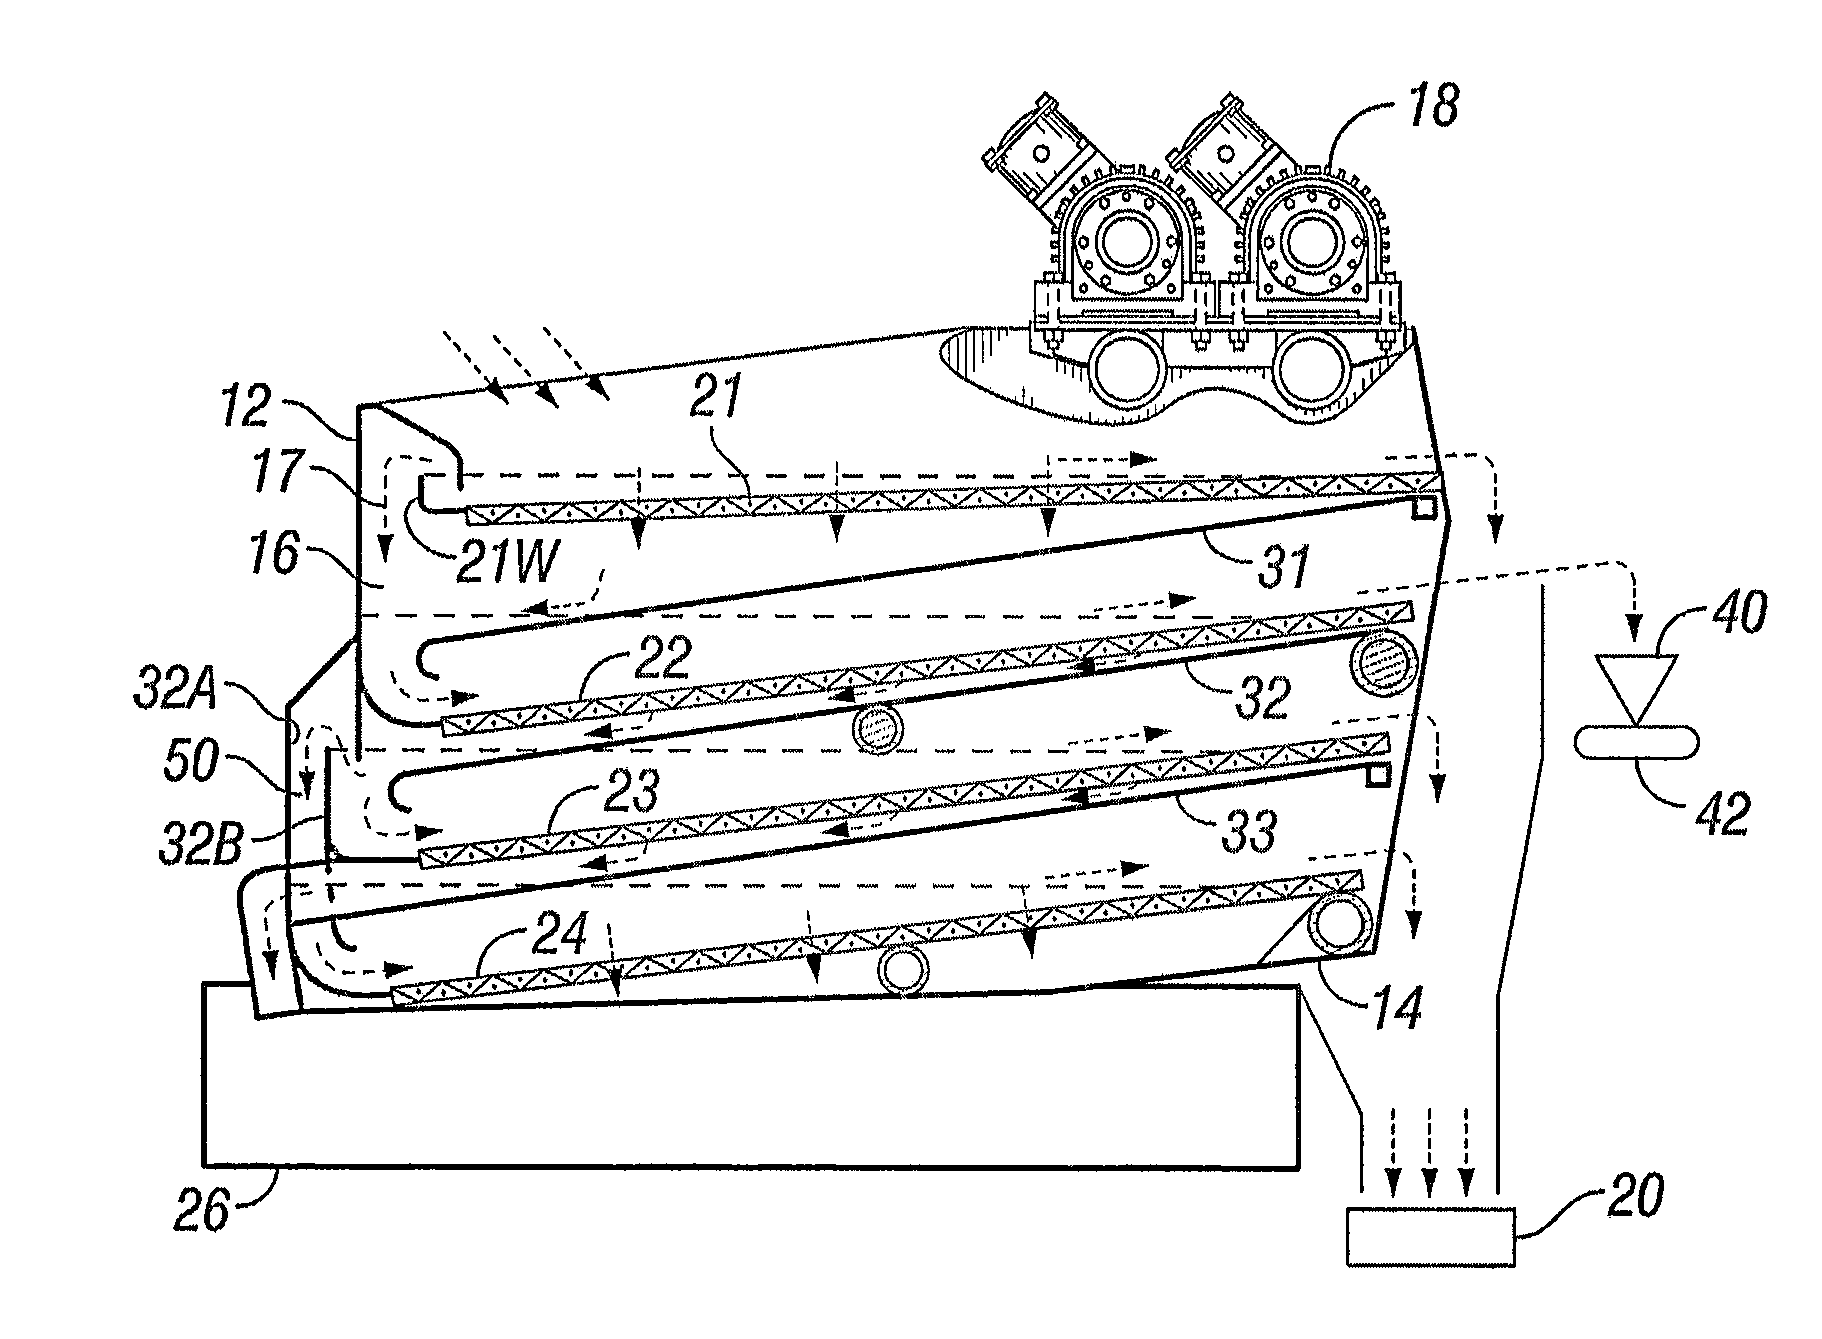 Shale shakers with selective series/parallel flow path conversion